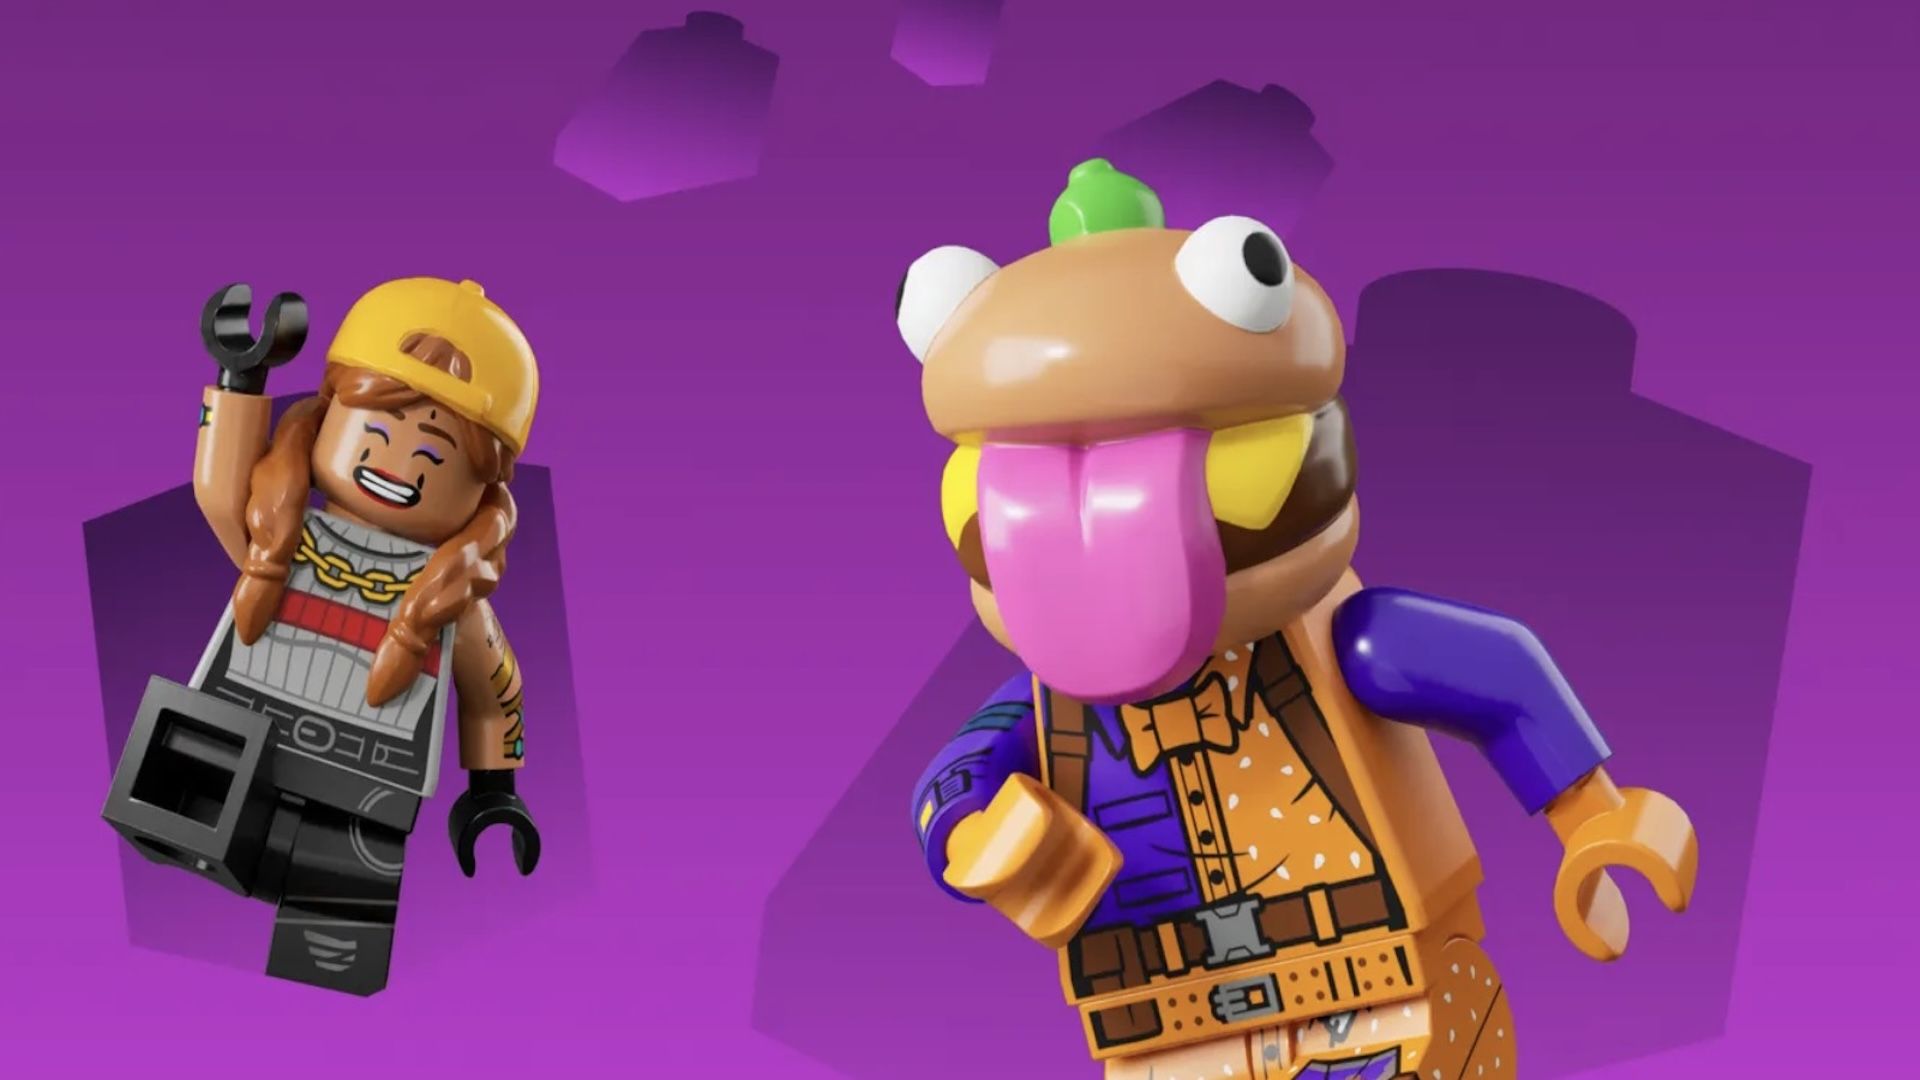 I have no idea if Lego Fortnite can live up to its potential, but I'm  hooked on the Tears of the Kingdom-meets-Valheim pitch